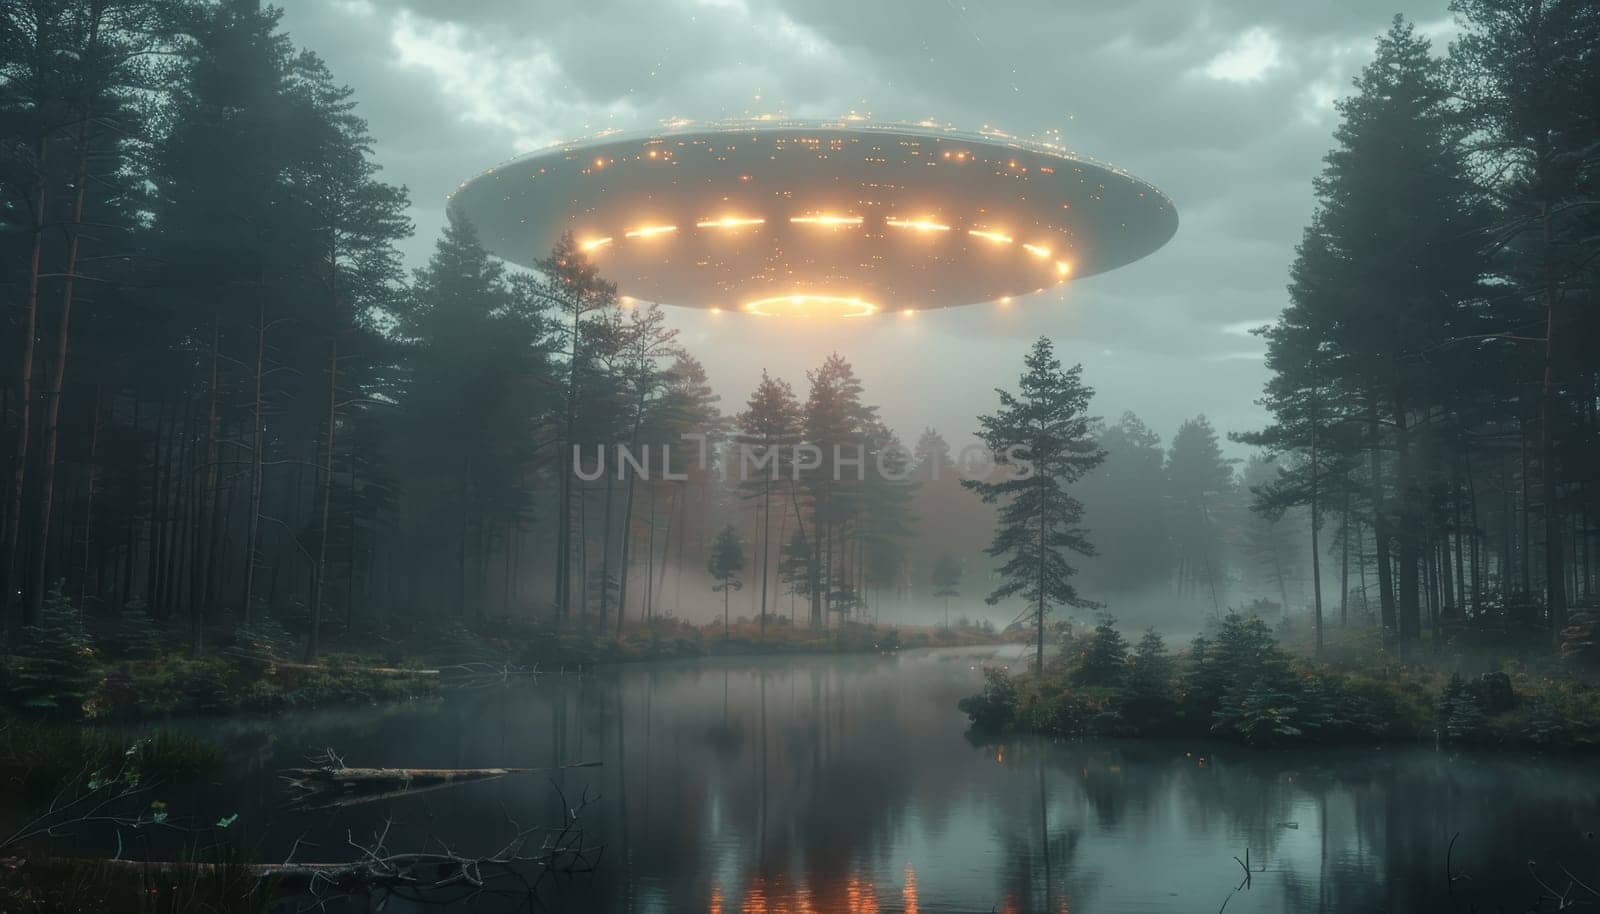 A group of alien spaceships are flying through a forest at night by AI generated image.